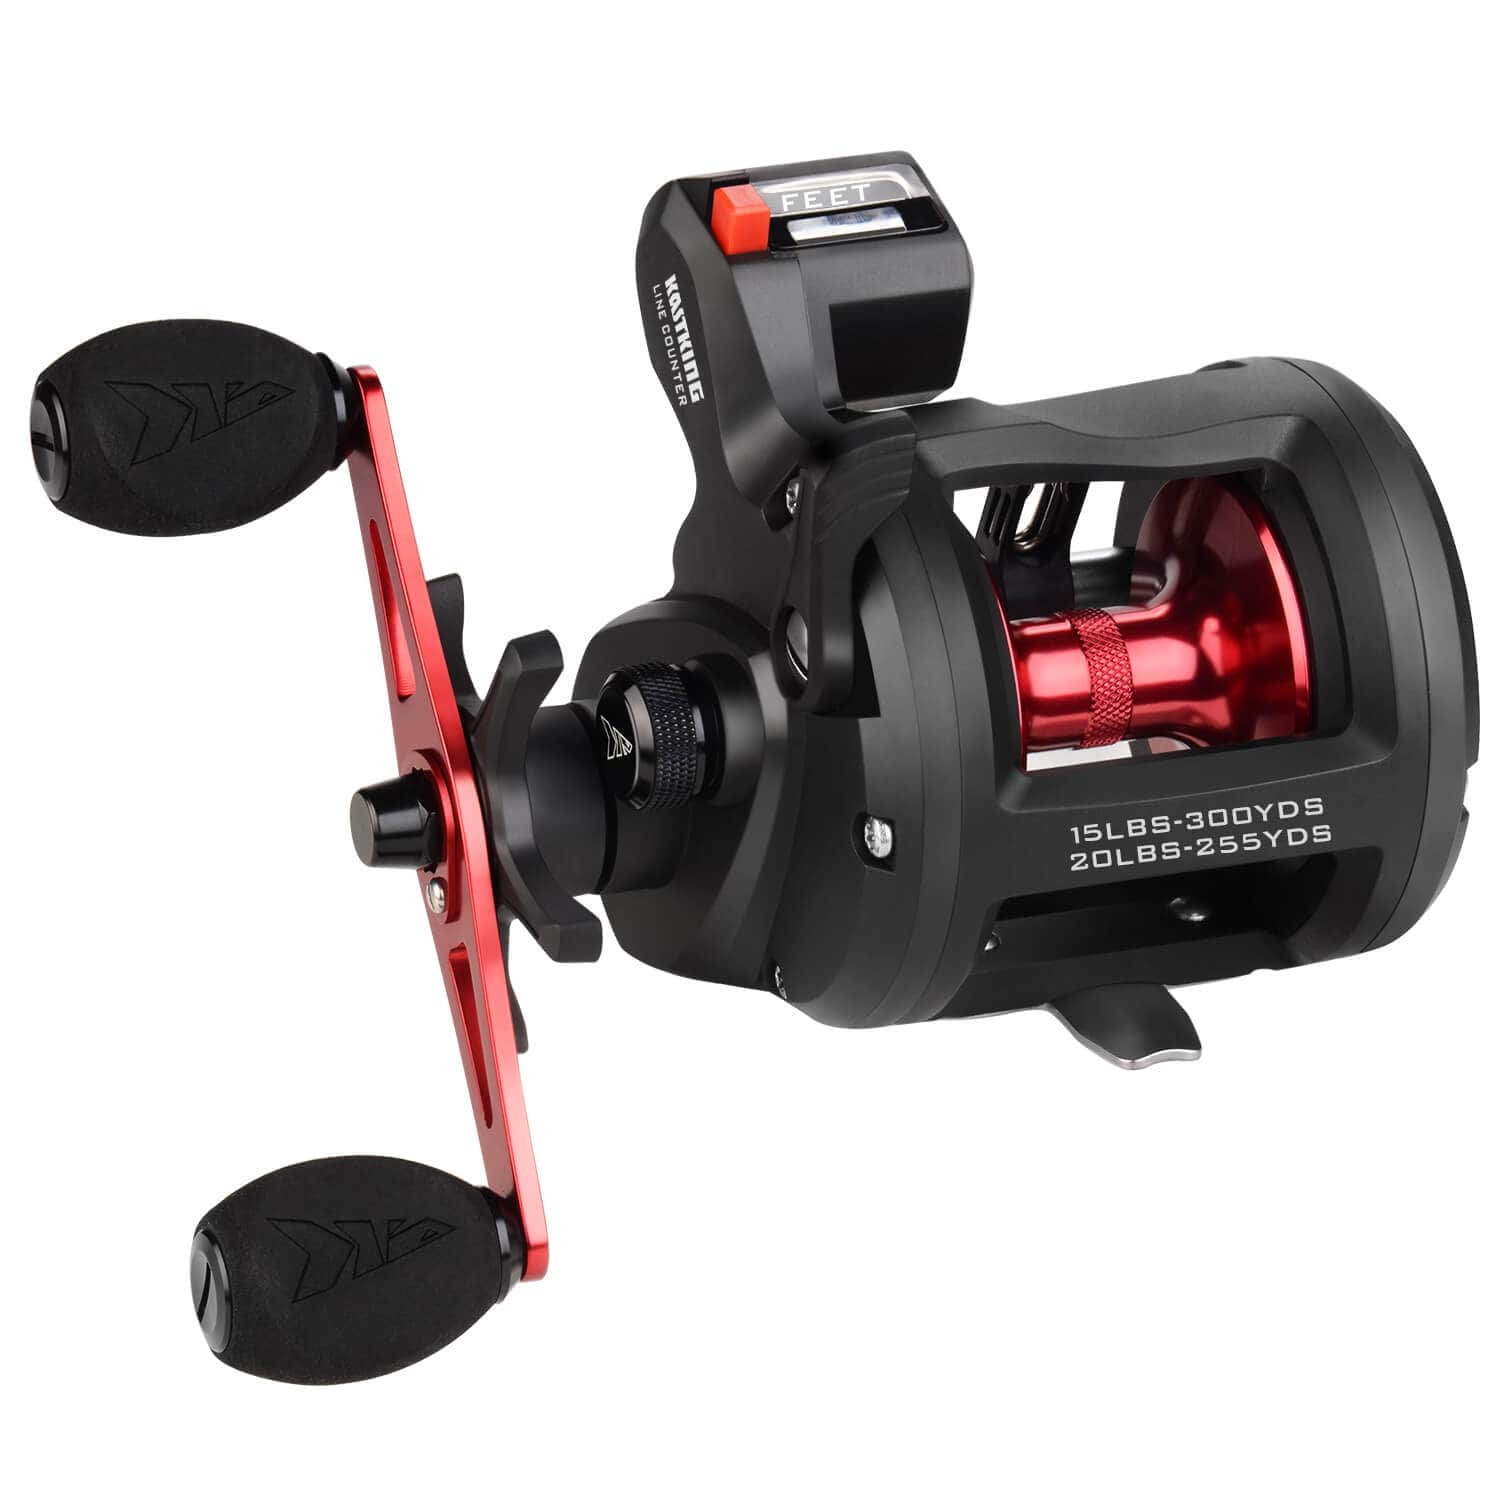 Classic Round Baitcasting Reels - Fishing Rods, Reels, Line, and